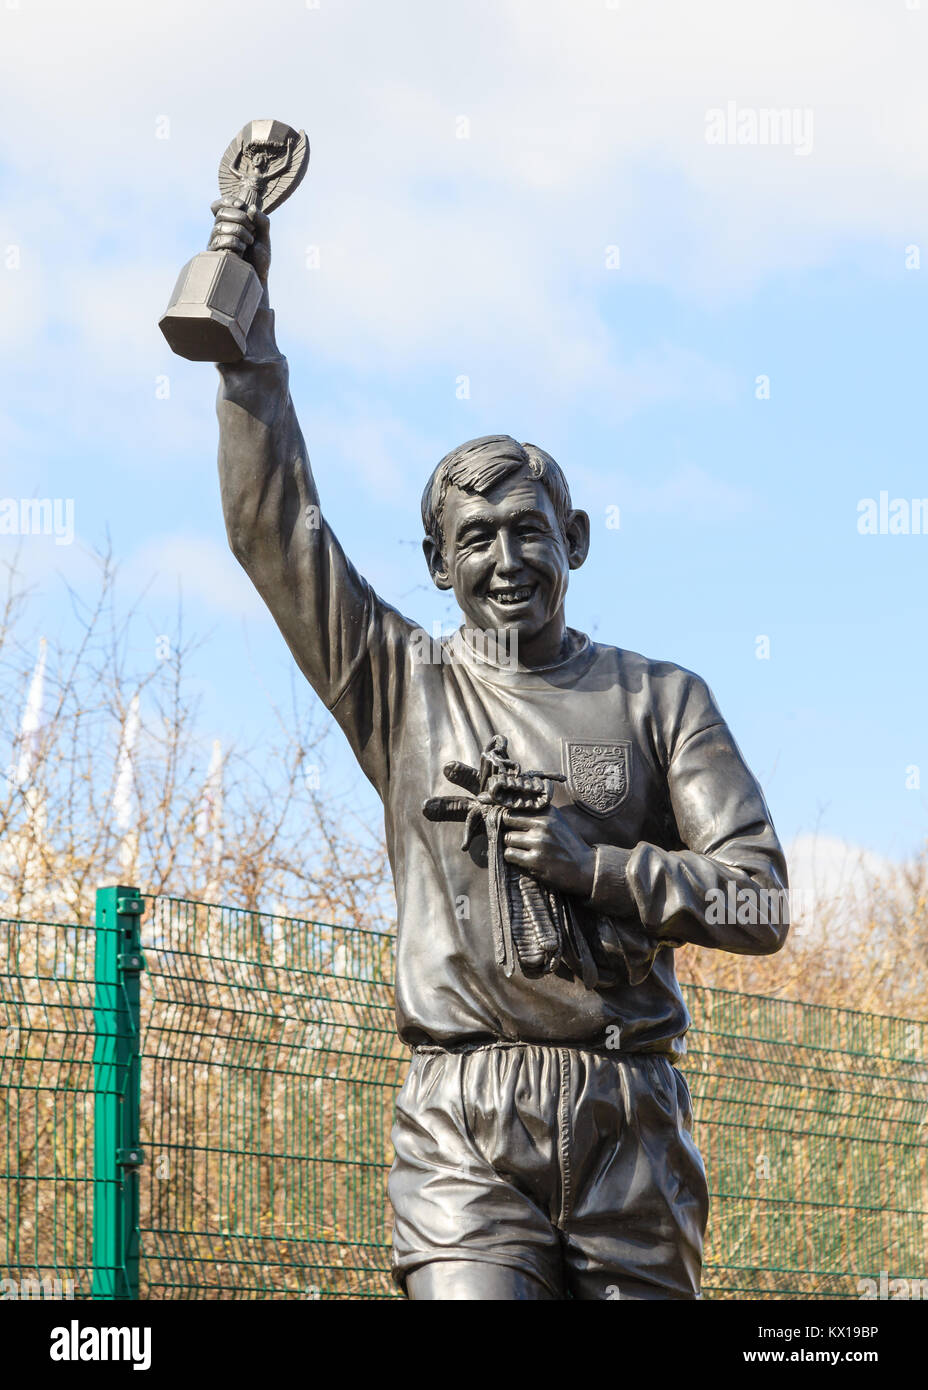 A statue of Gordon Banks in Stoke-On-Trent, England..  It celebrates his role as goalkeeper in the 1966 England World Cup winning football team. Stock Photo